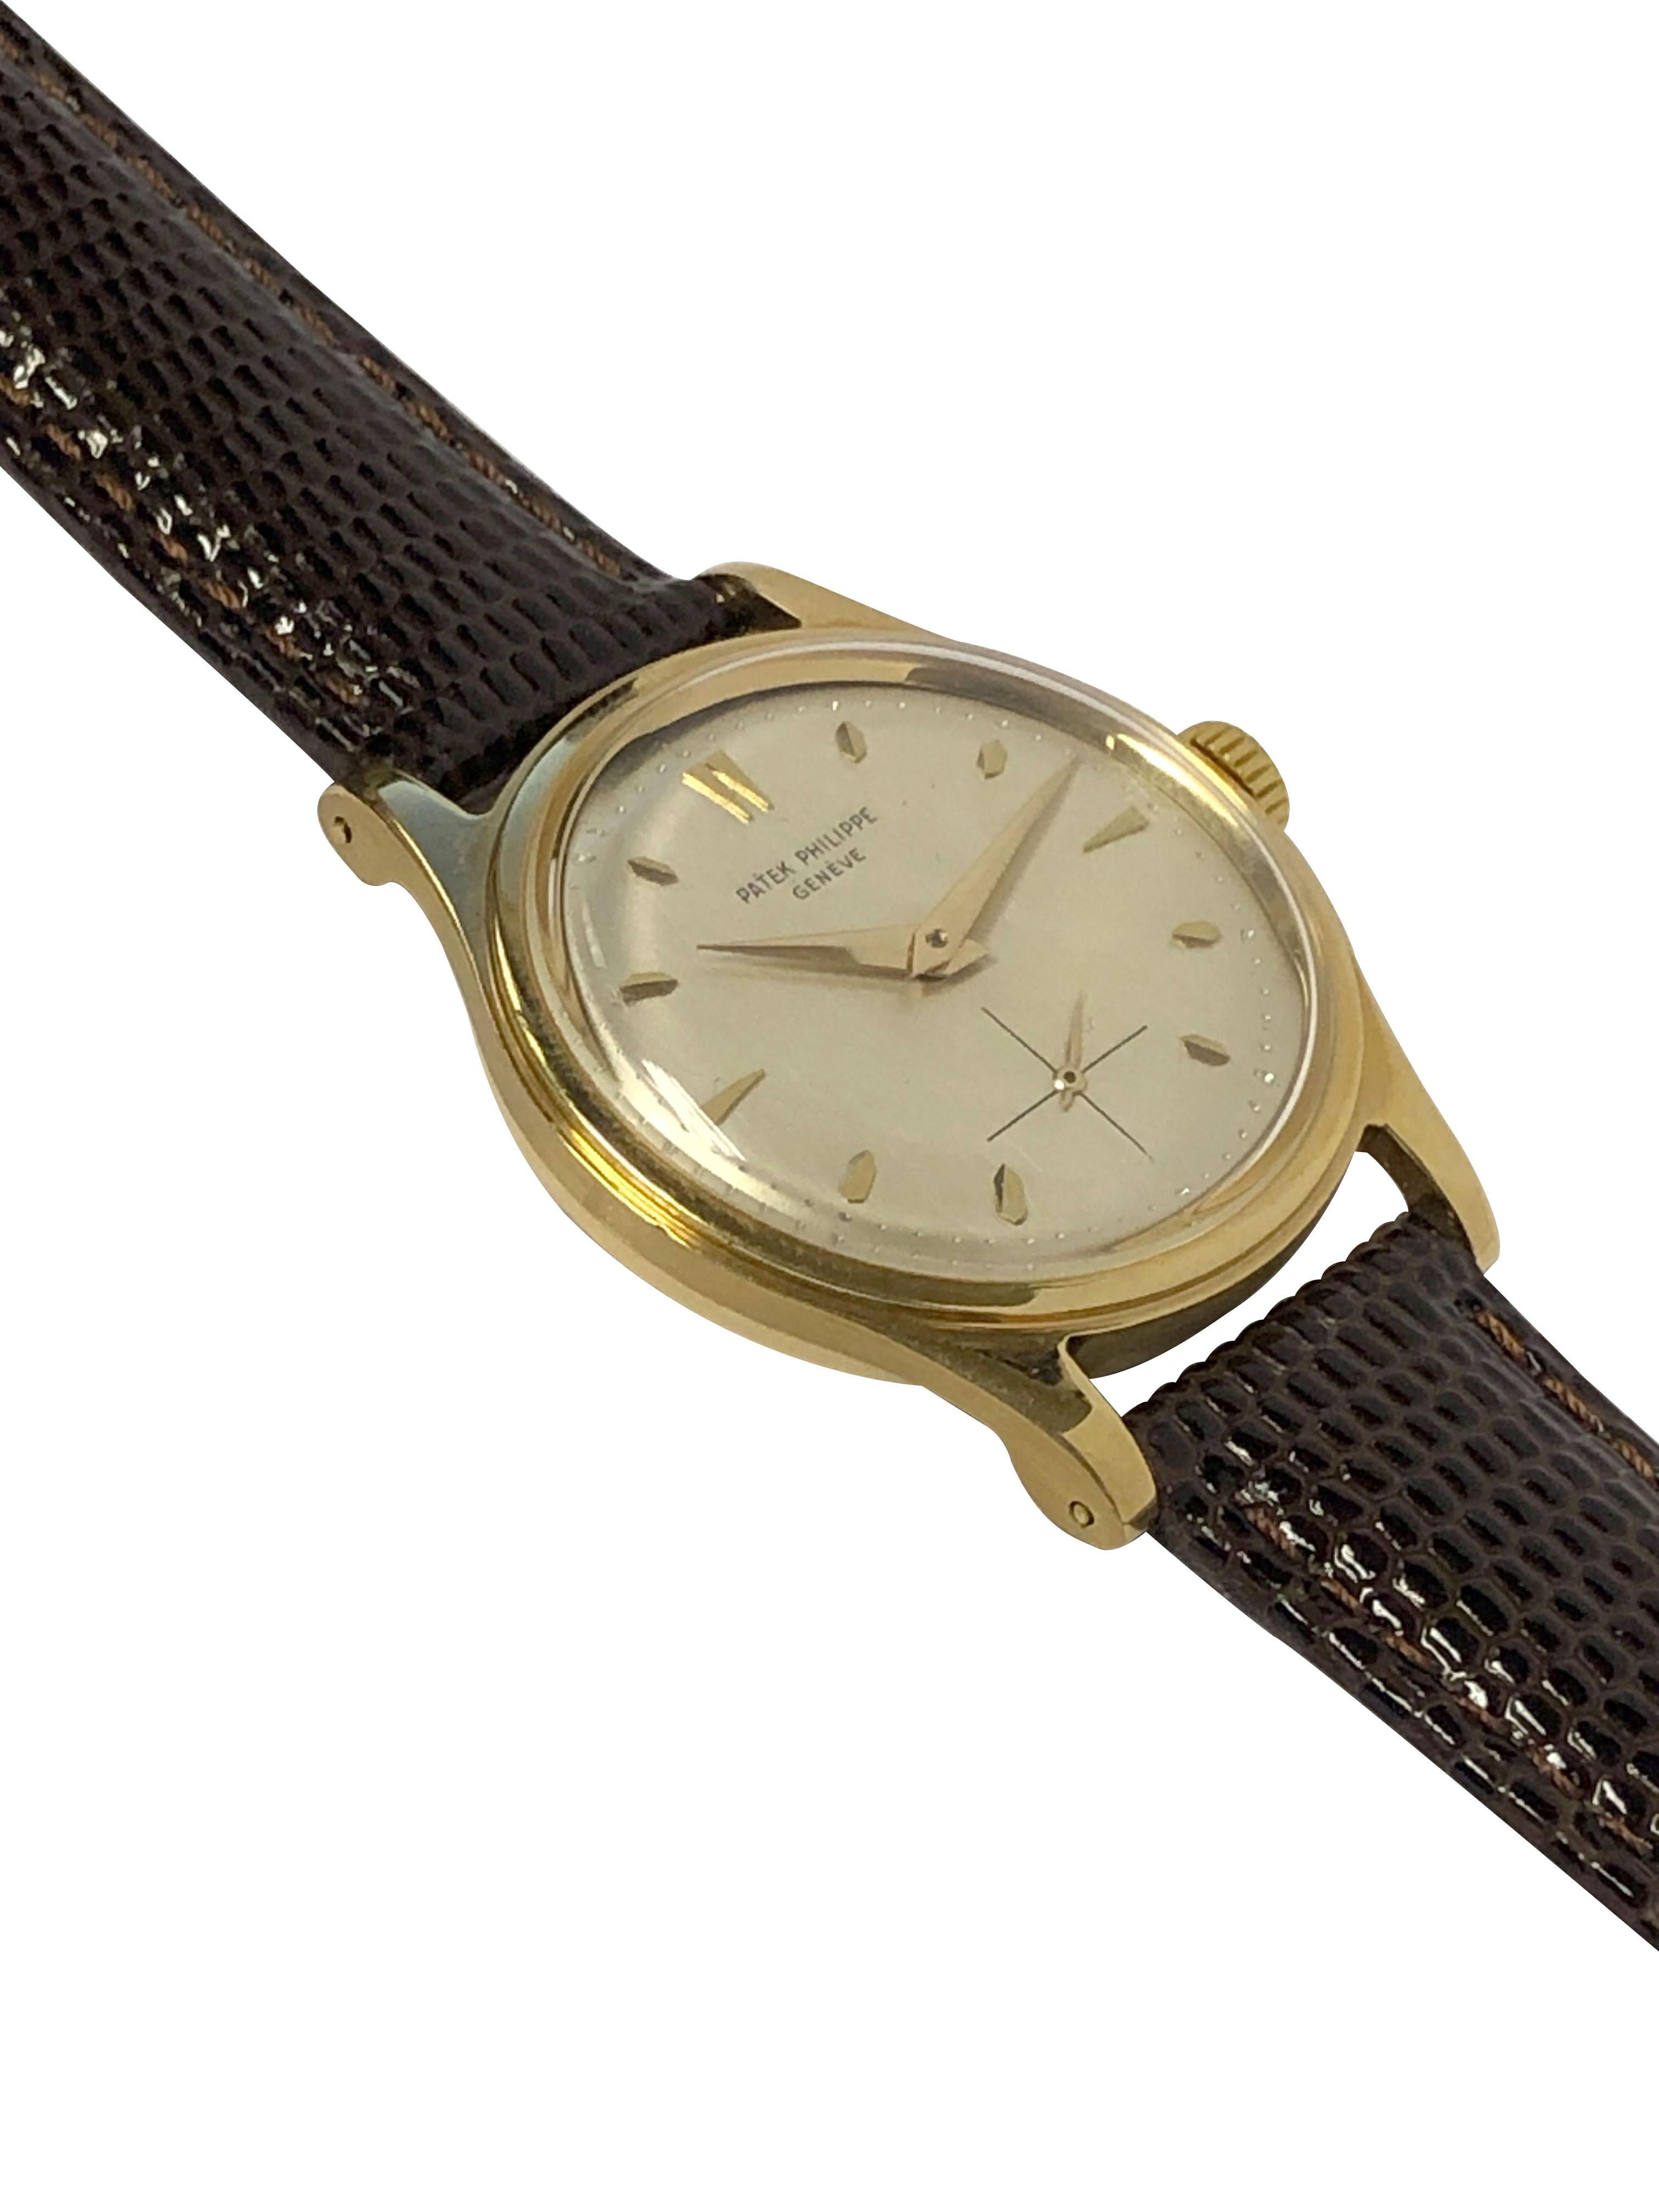 Circa mid 1950s Patek Philippe Reference 2509 Wrist Watch, 35 M.M x 9 M.M thick 18k Yellow Gold Waterproof case with inside dust cover. Caliber 12-400 Gold lever 18 Jewel mechanical, Manual wind movement. Silver Satin Dial with raised Gold markers